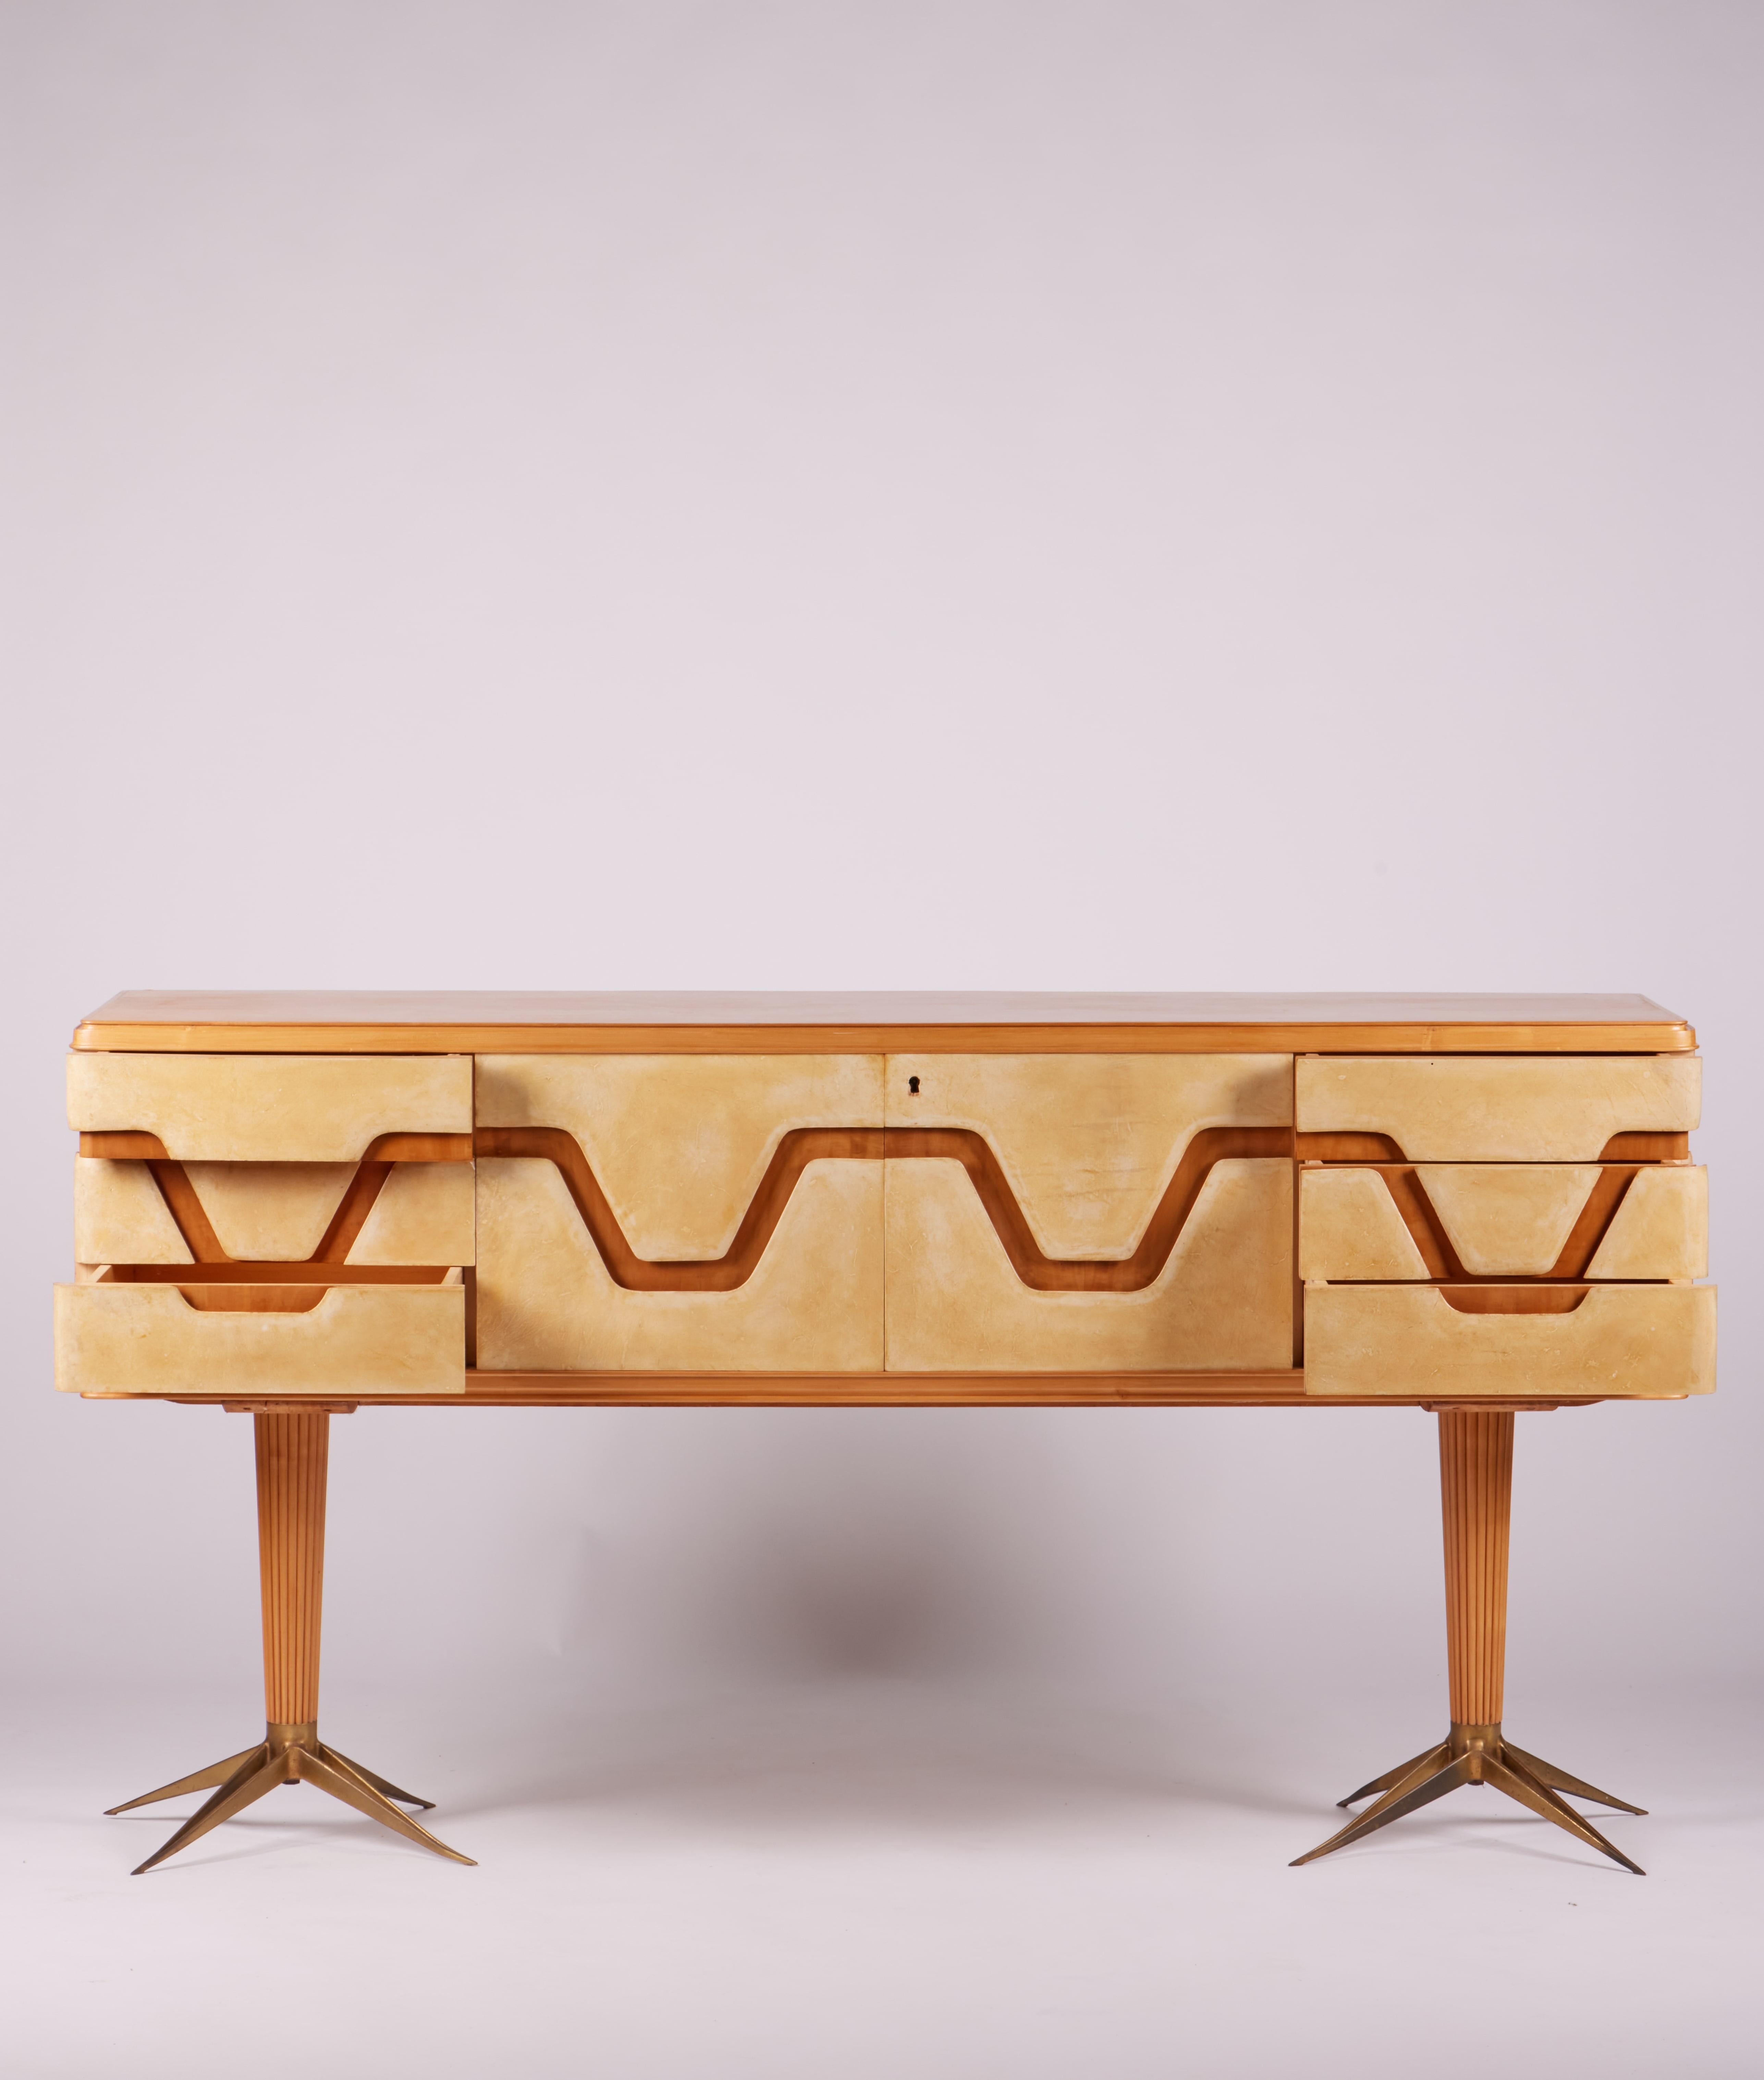 Italian midcentury parchment and walnut sideboard with brass and walnut legs, 1940s.

A well organized storing parchment and walnut main volume is held by two unique looking brass and ornate vertical wood elements.
Inside the sideboard, a